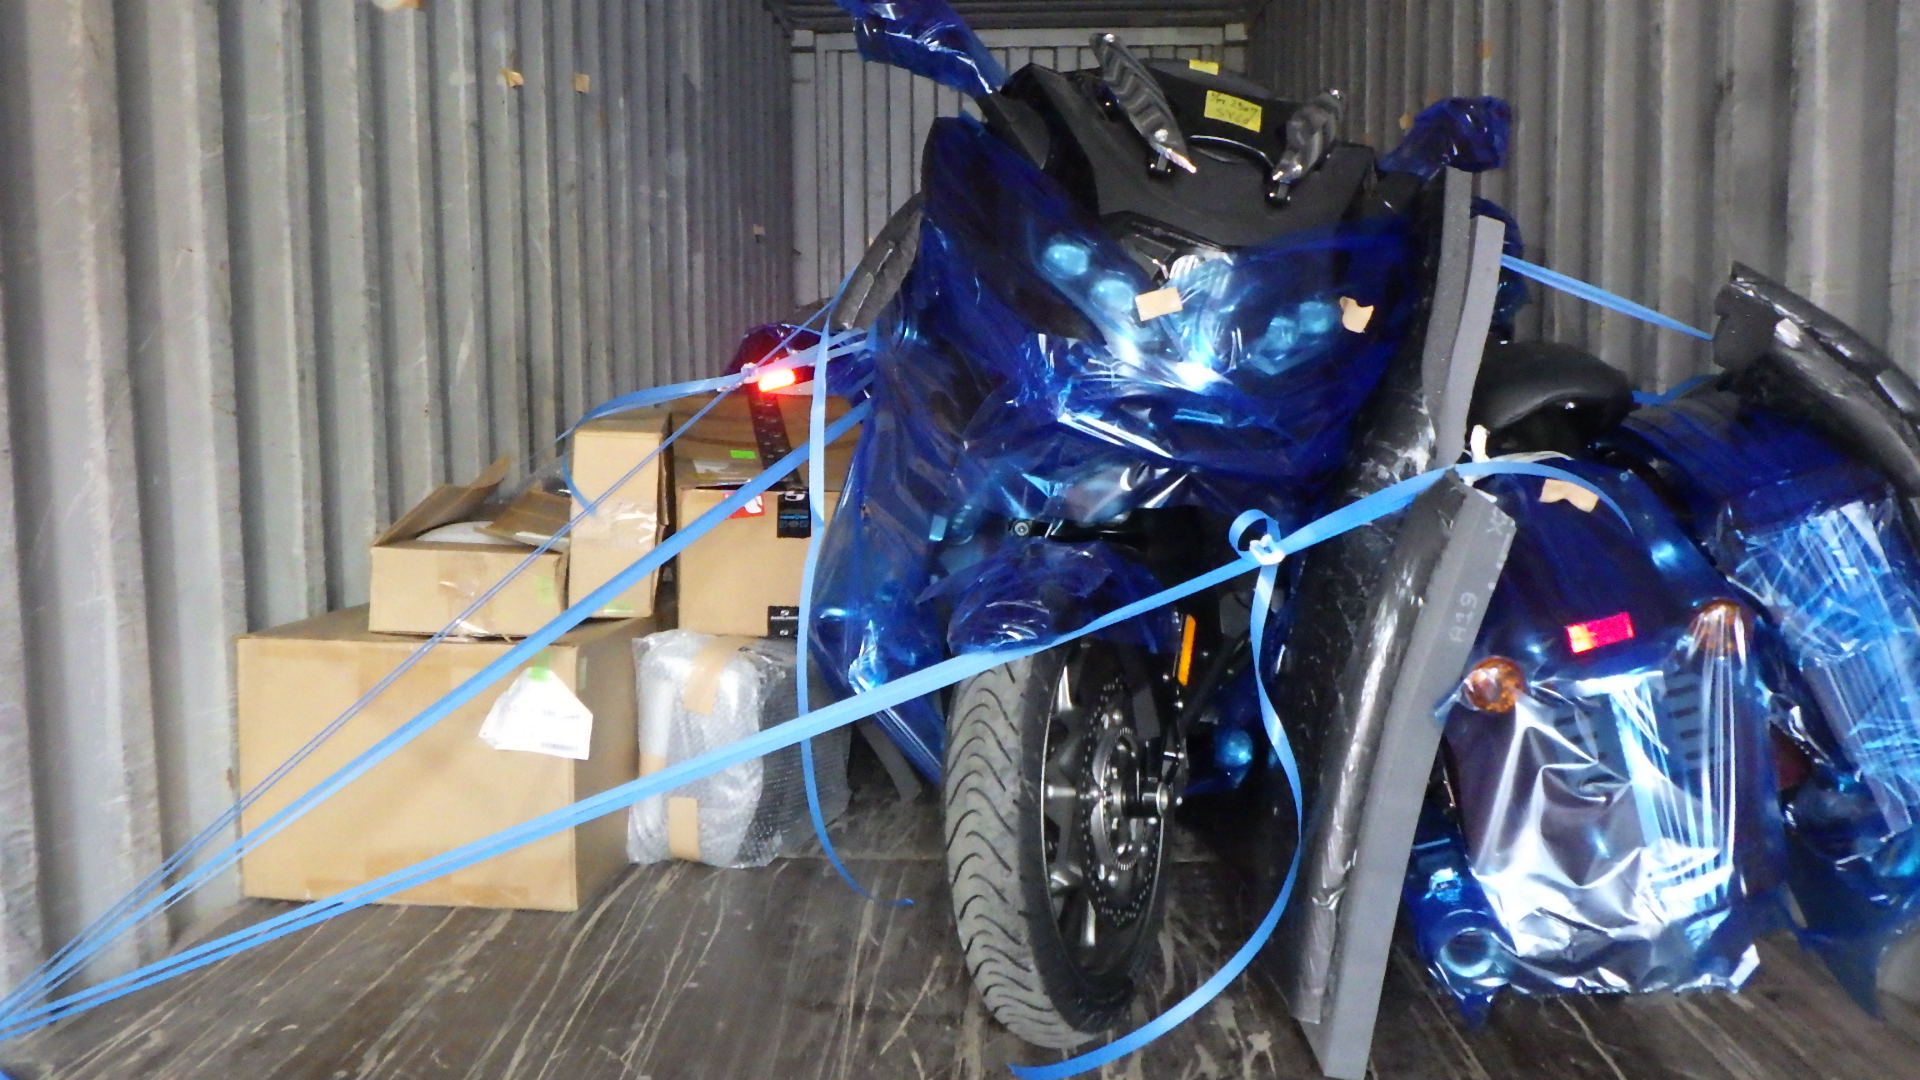 Shipping Example: 40FT Container with 13 Motorcycles